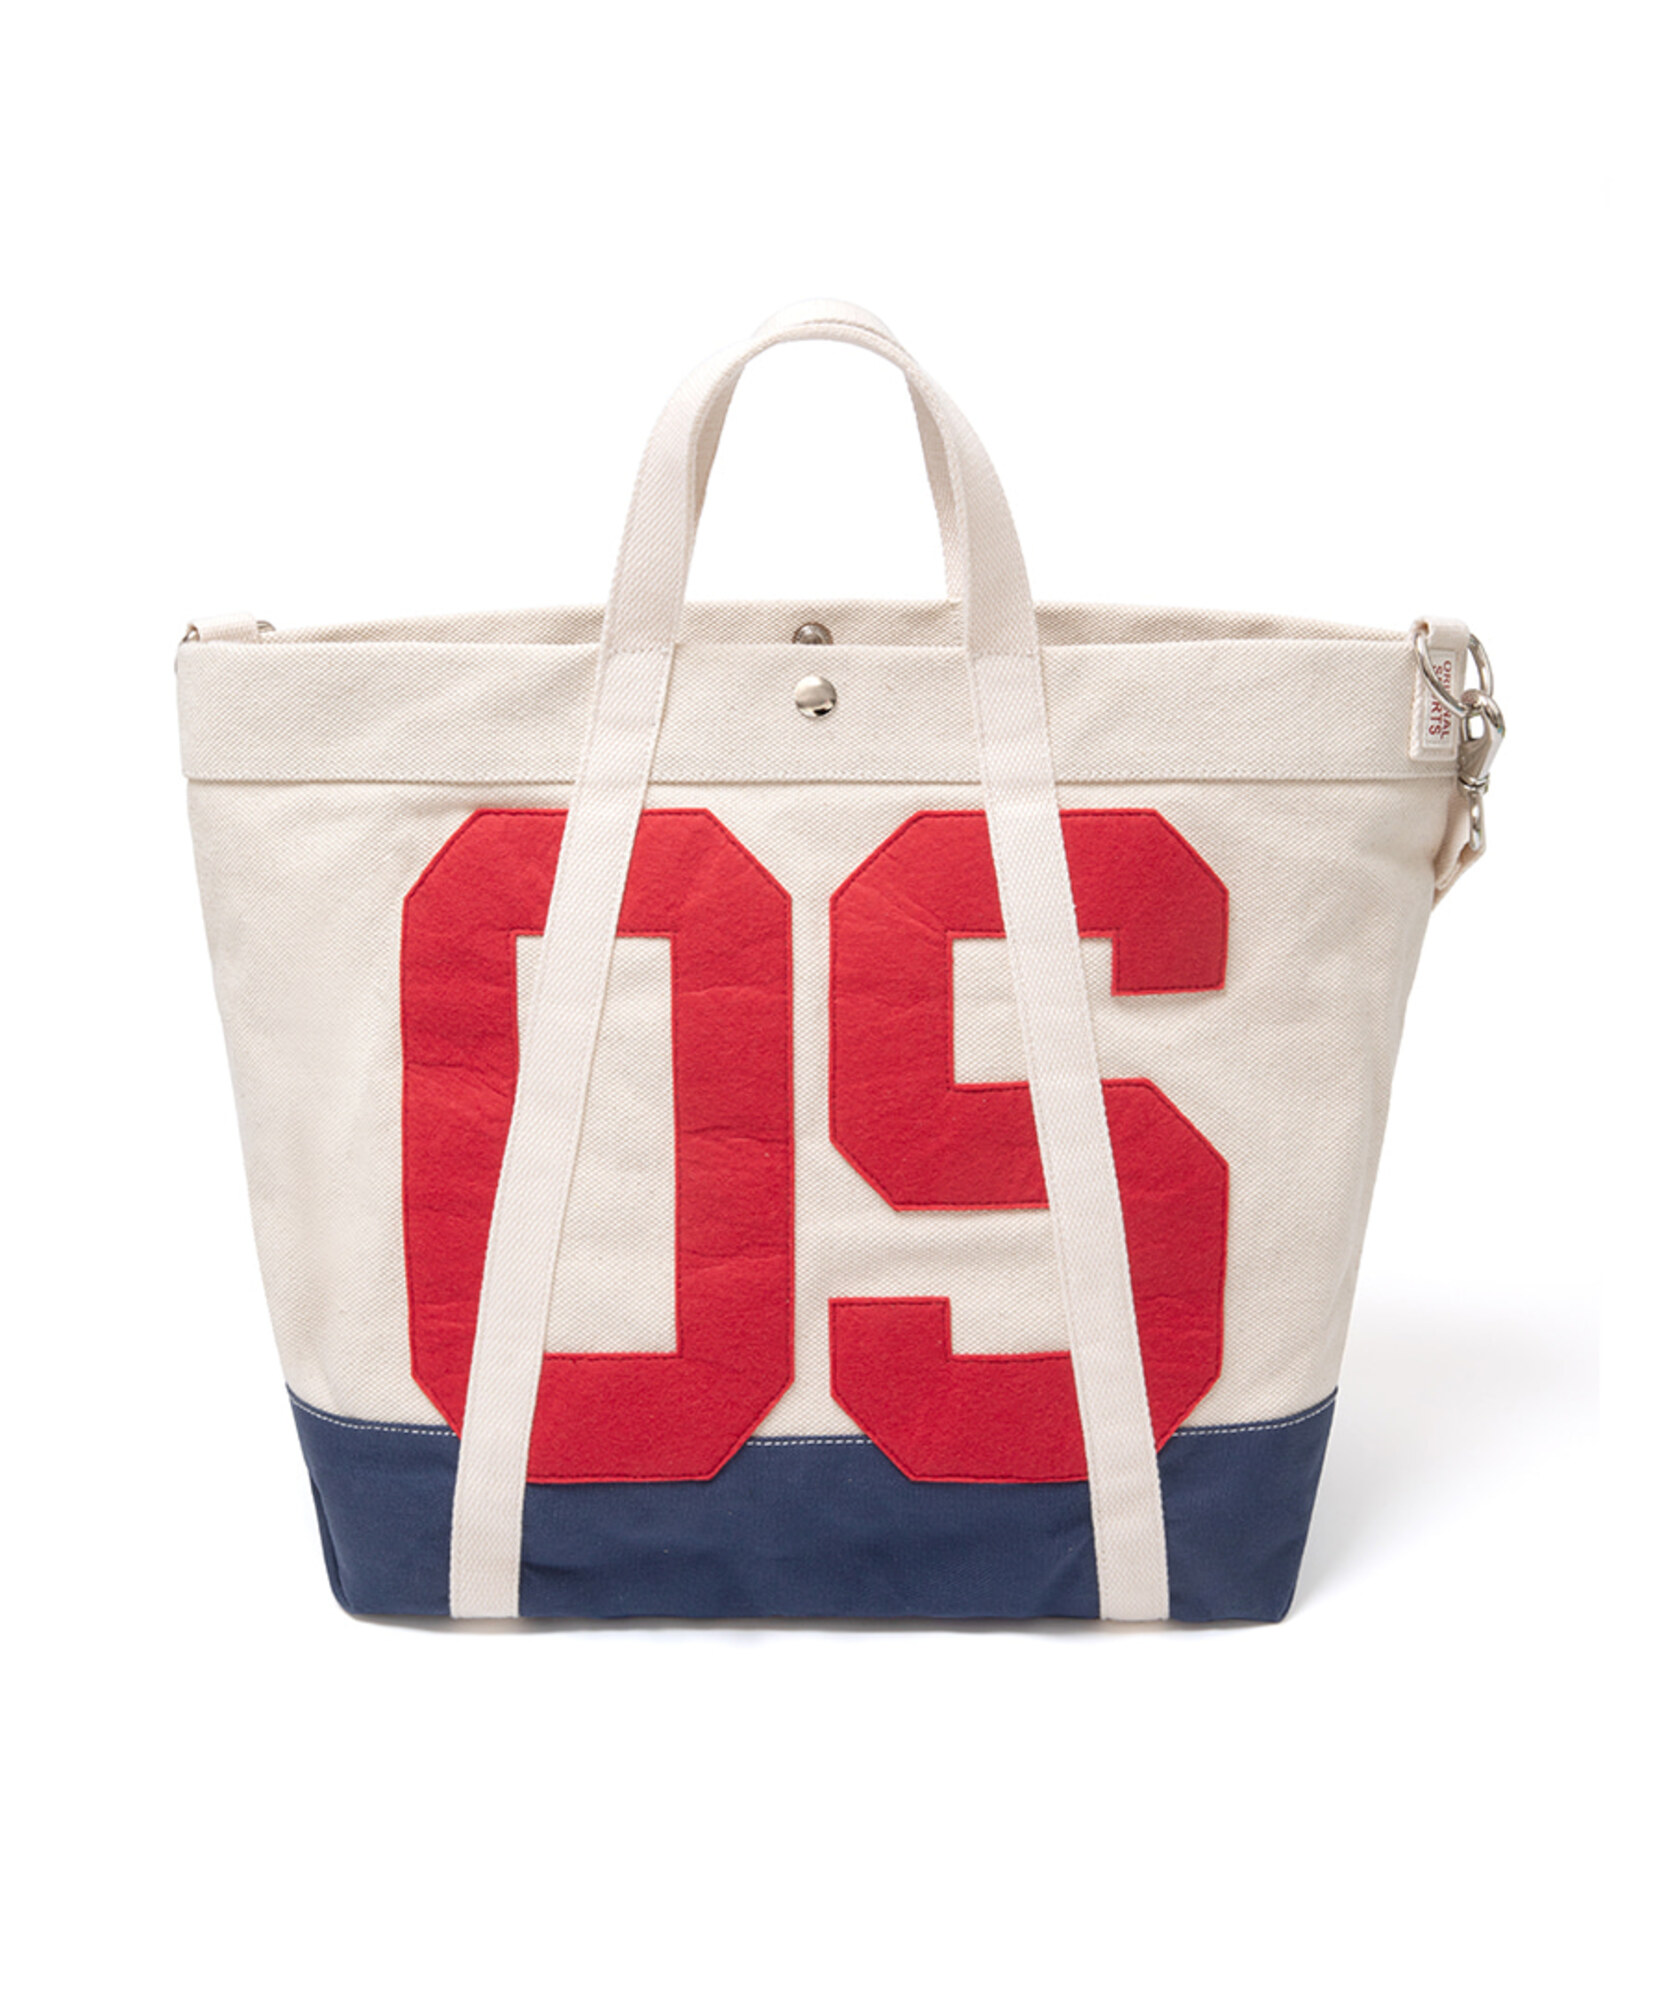 CANVAS TOTE WITH STRAP OFWT